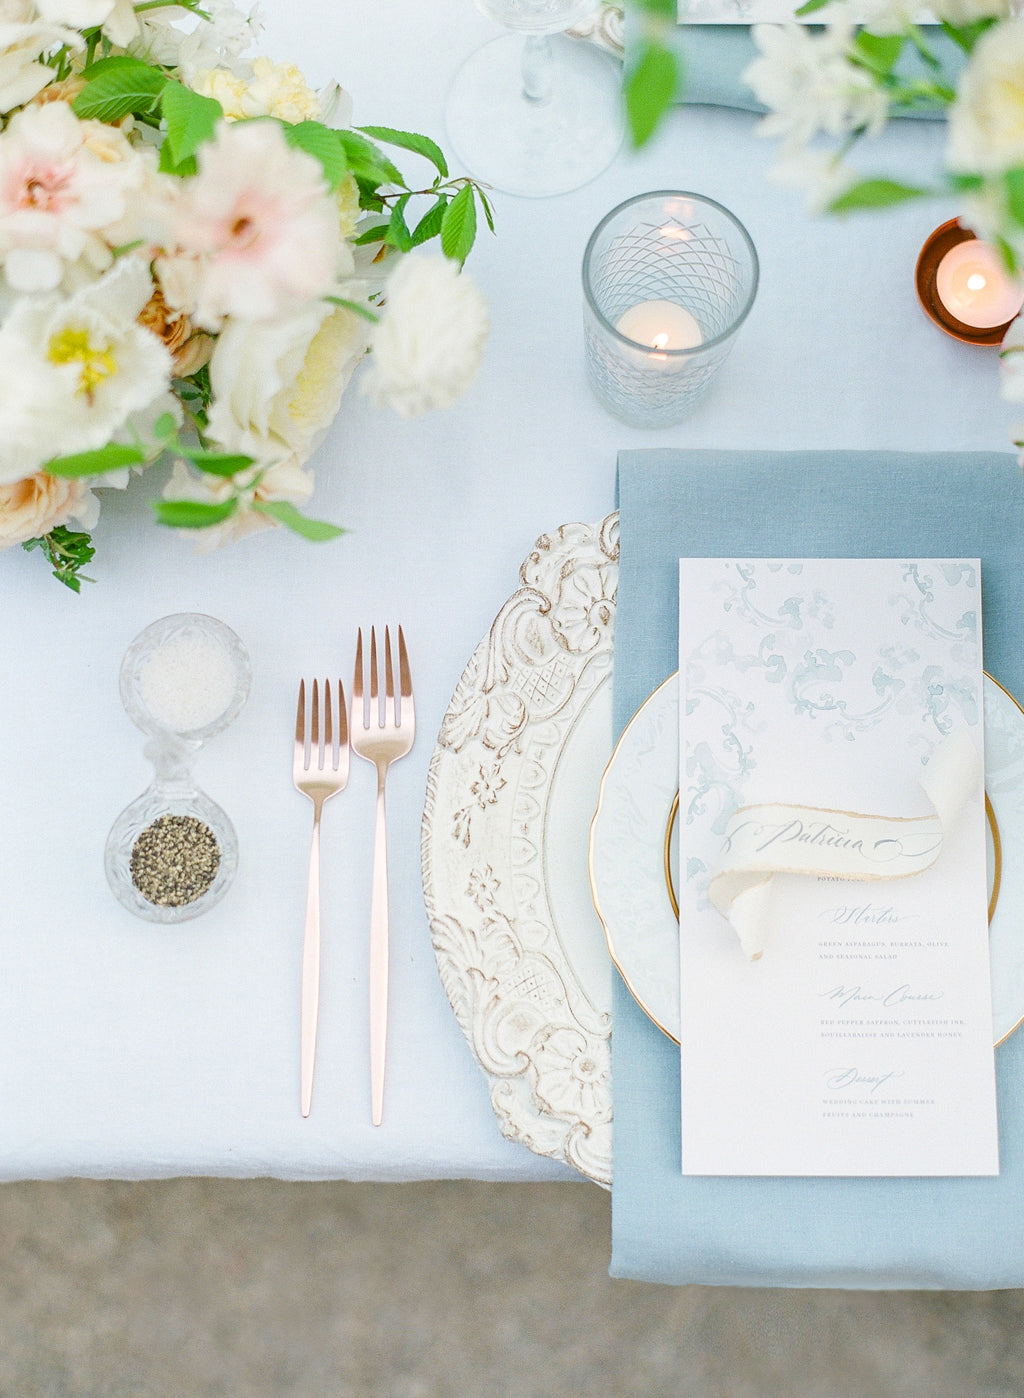 Photo by Oliver Fly, styled by Jennifer Fox Weddings, featuring linens by Madame de la Maison 